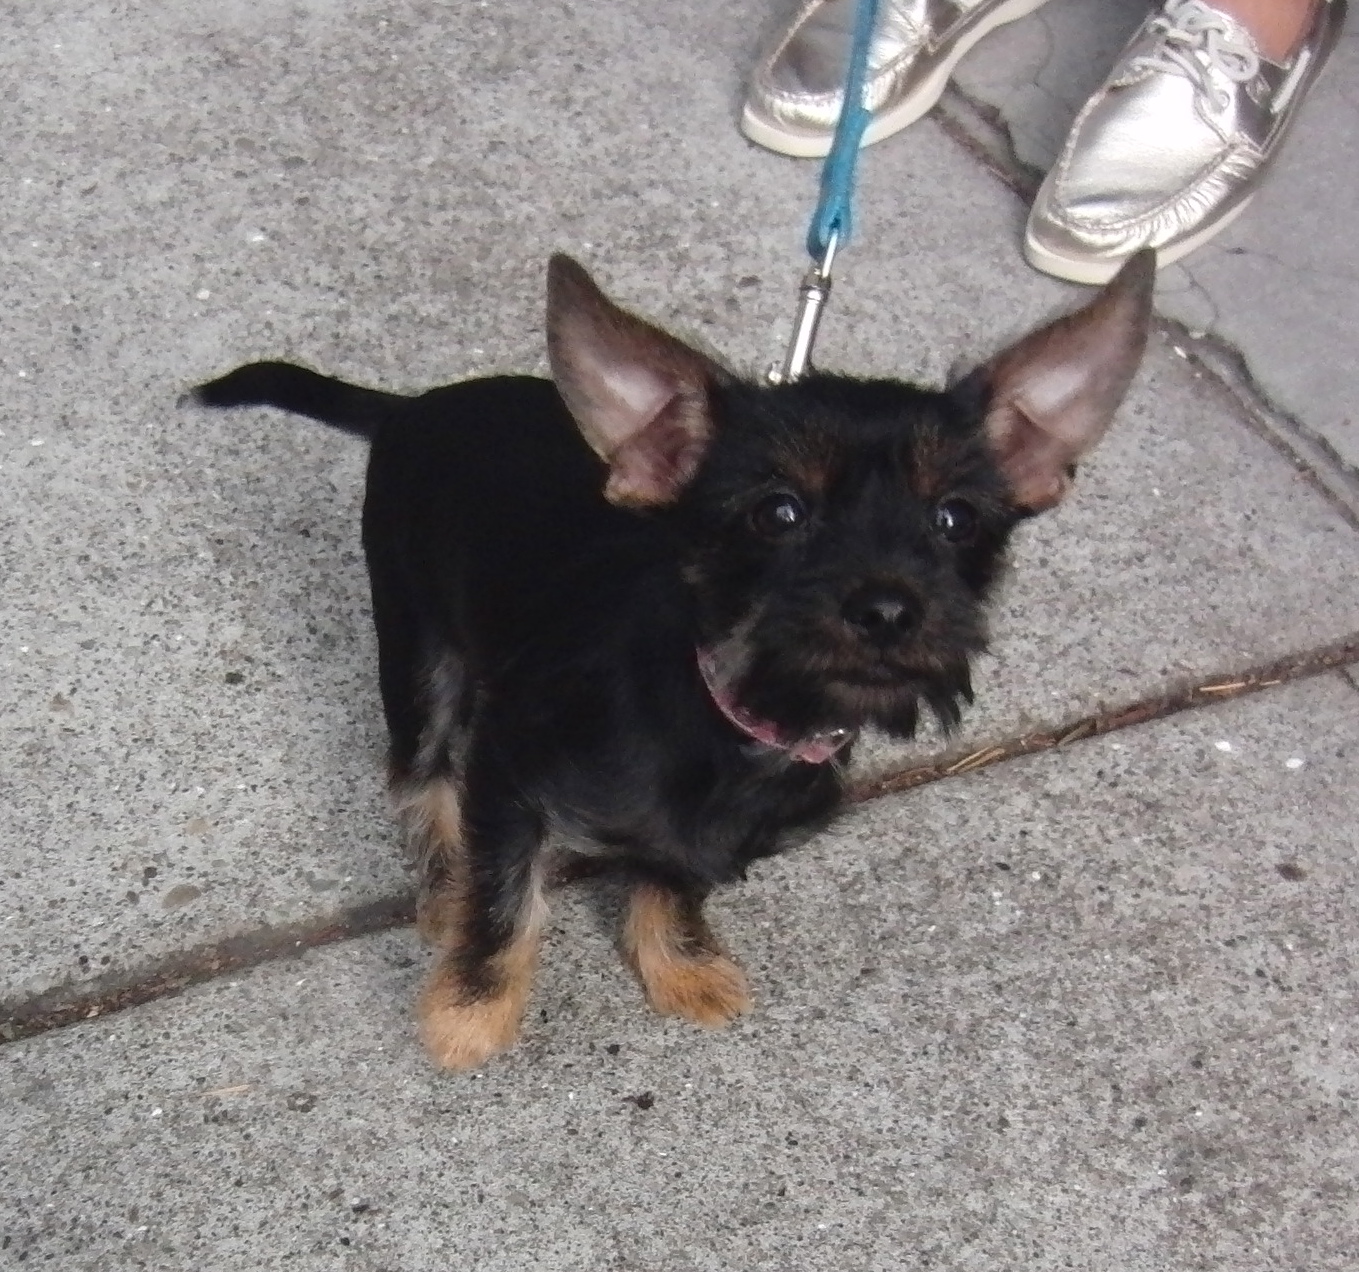 Four-Month-Old Yorkshire Terrier (Yorkie) With Puppy Coloration